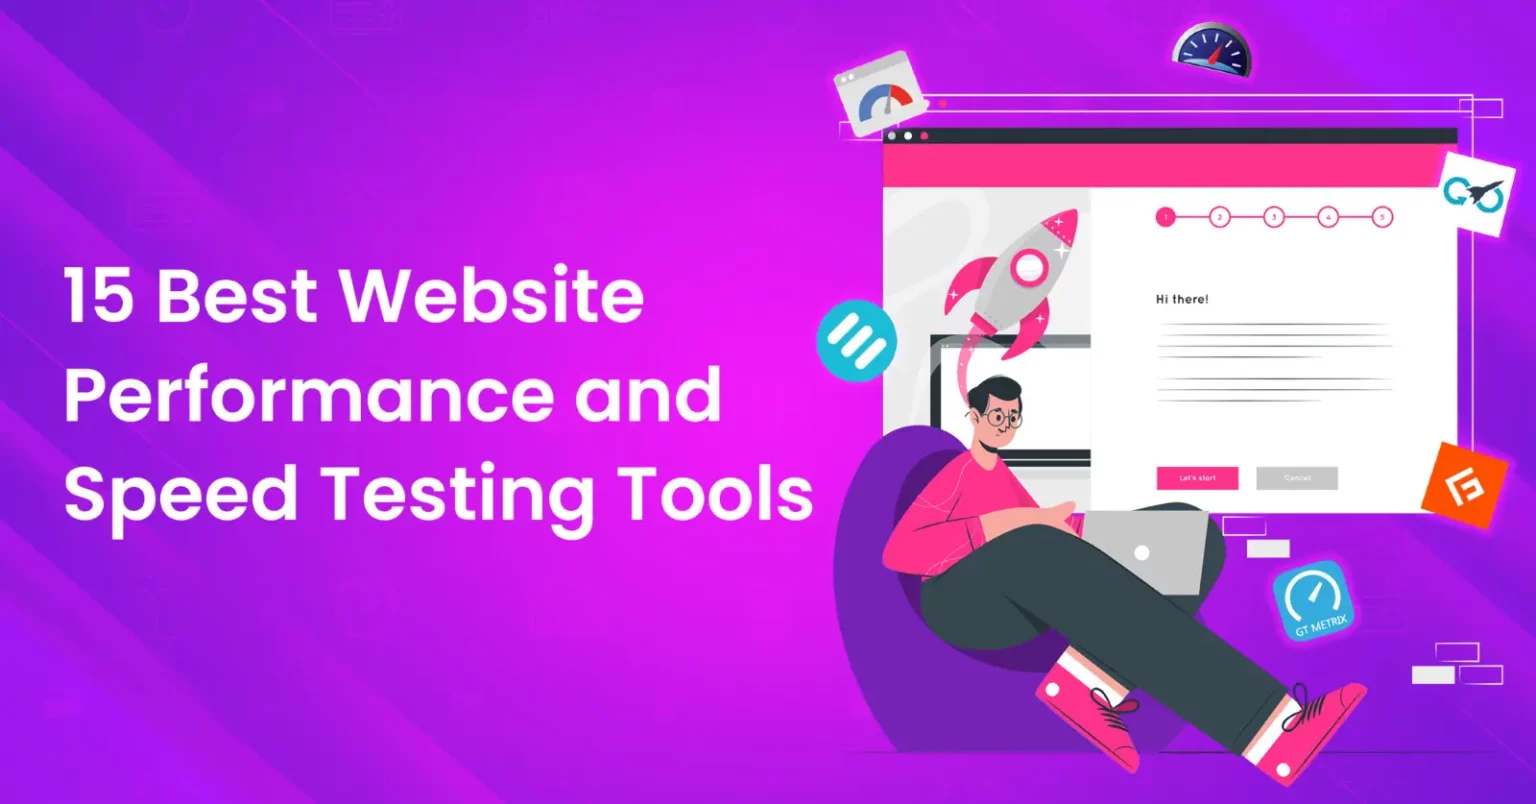 web banner for our blog - 15 best website performance and speed testing tools